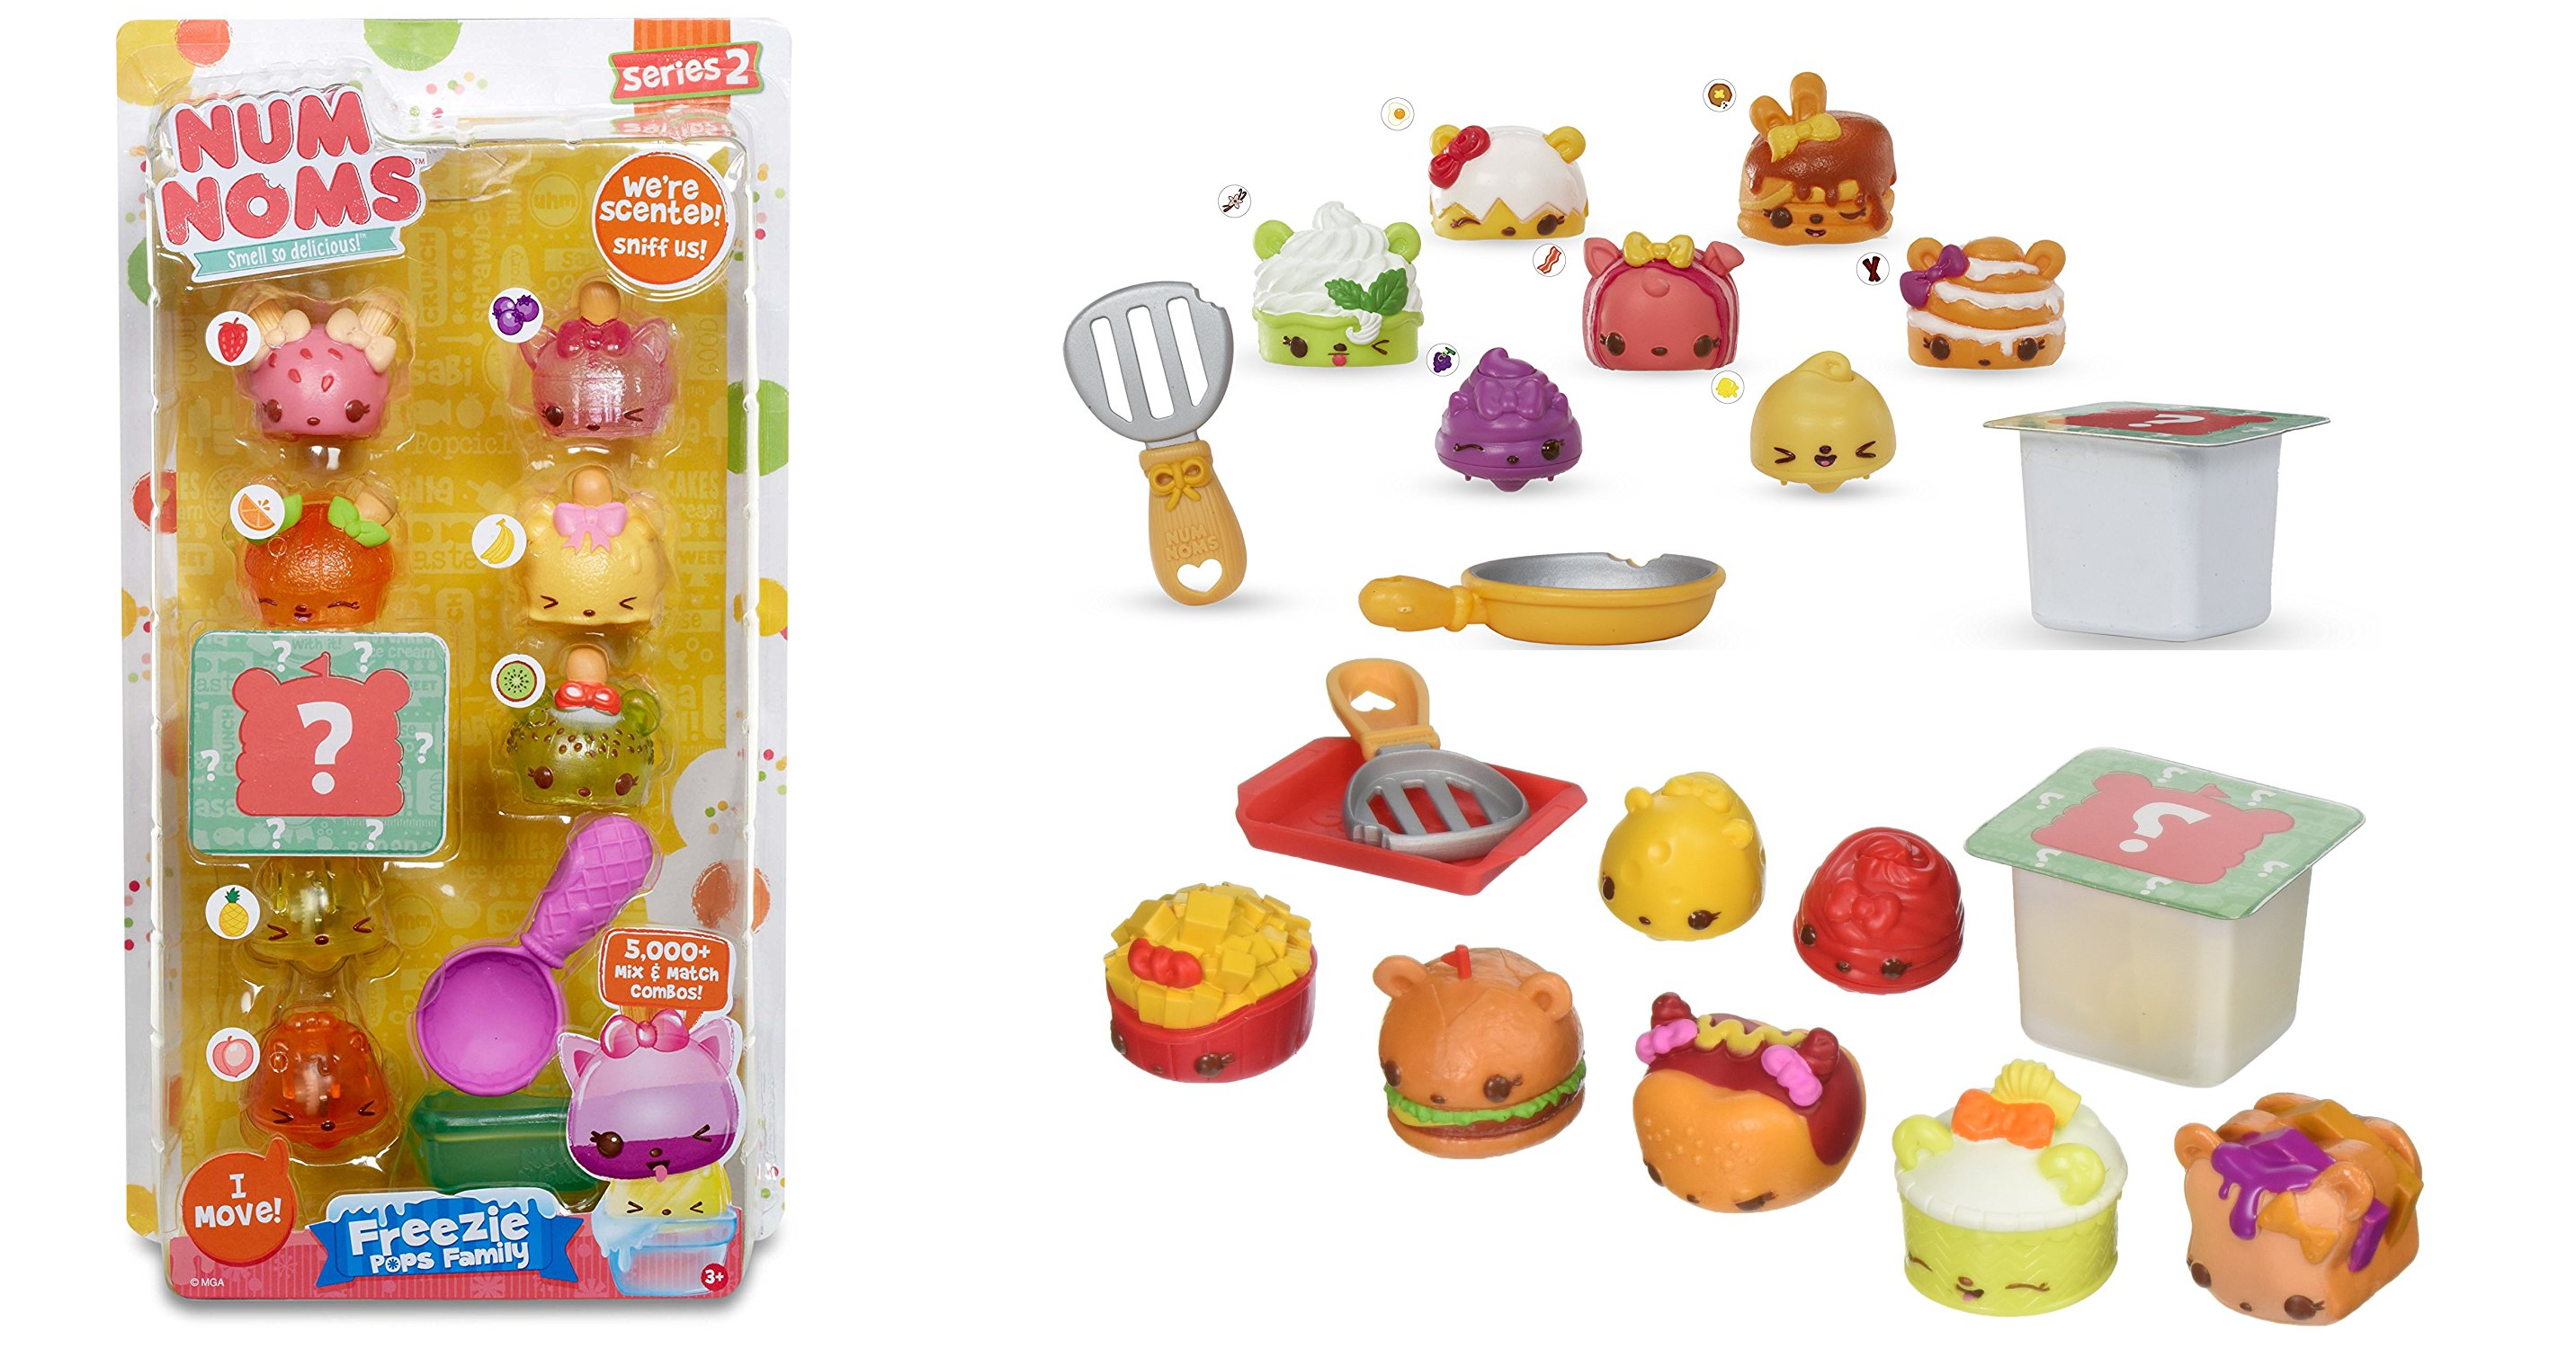 PRICE DROP! Num Noms Series 2 8 Packs Only $5.99 Each! (Reg $19.99) 4 Sets to Choose From!